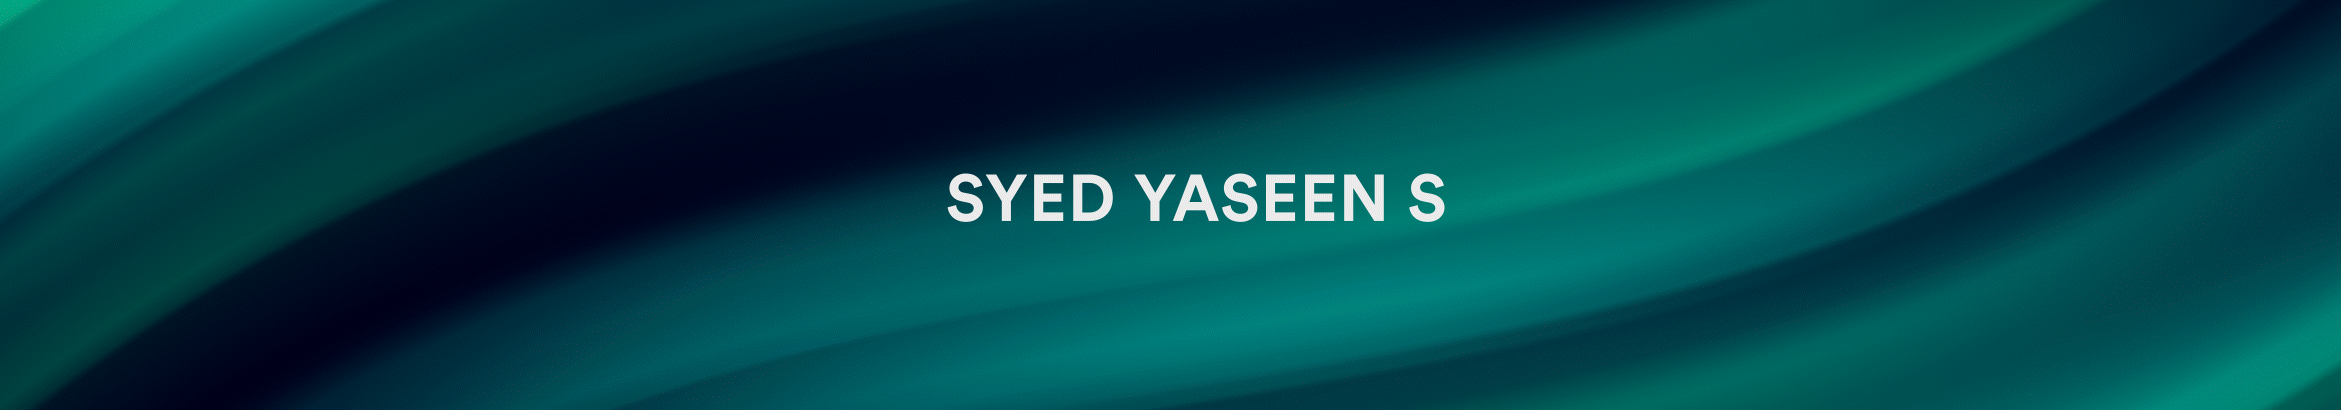 Syed Yaseen's profile banner